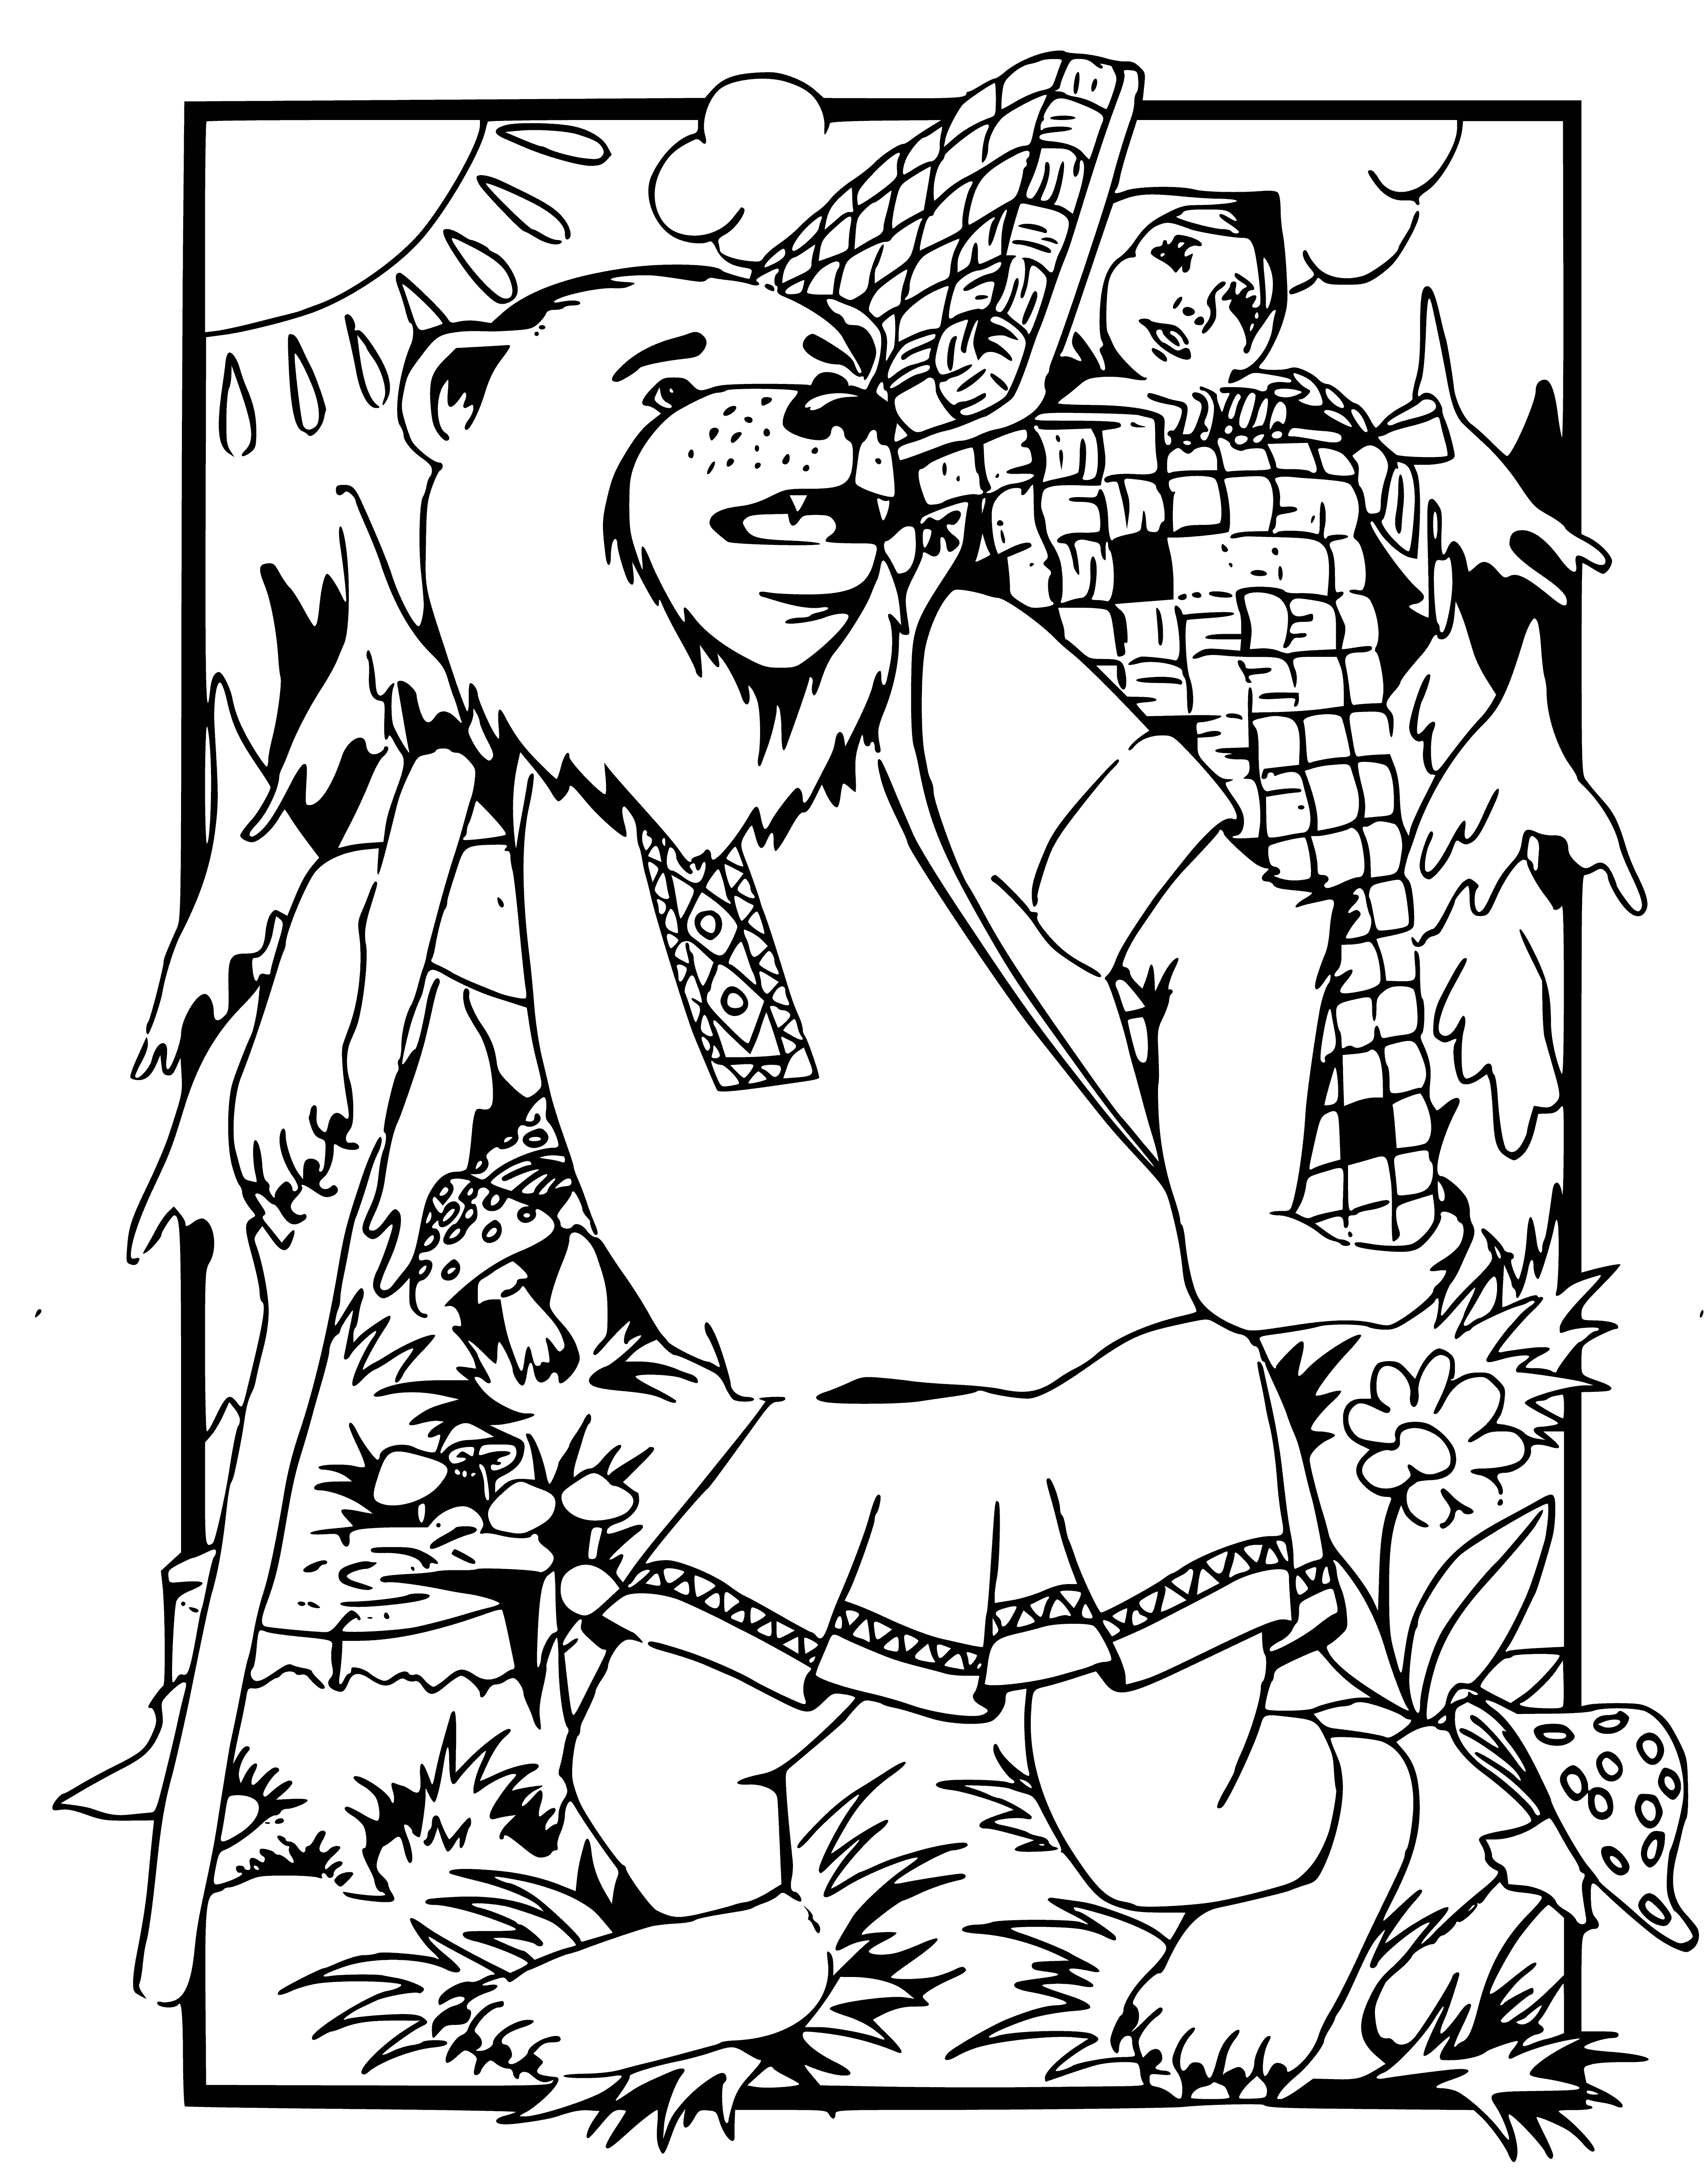 Masha in the box coloring page